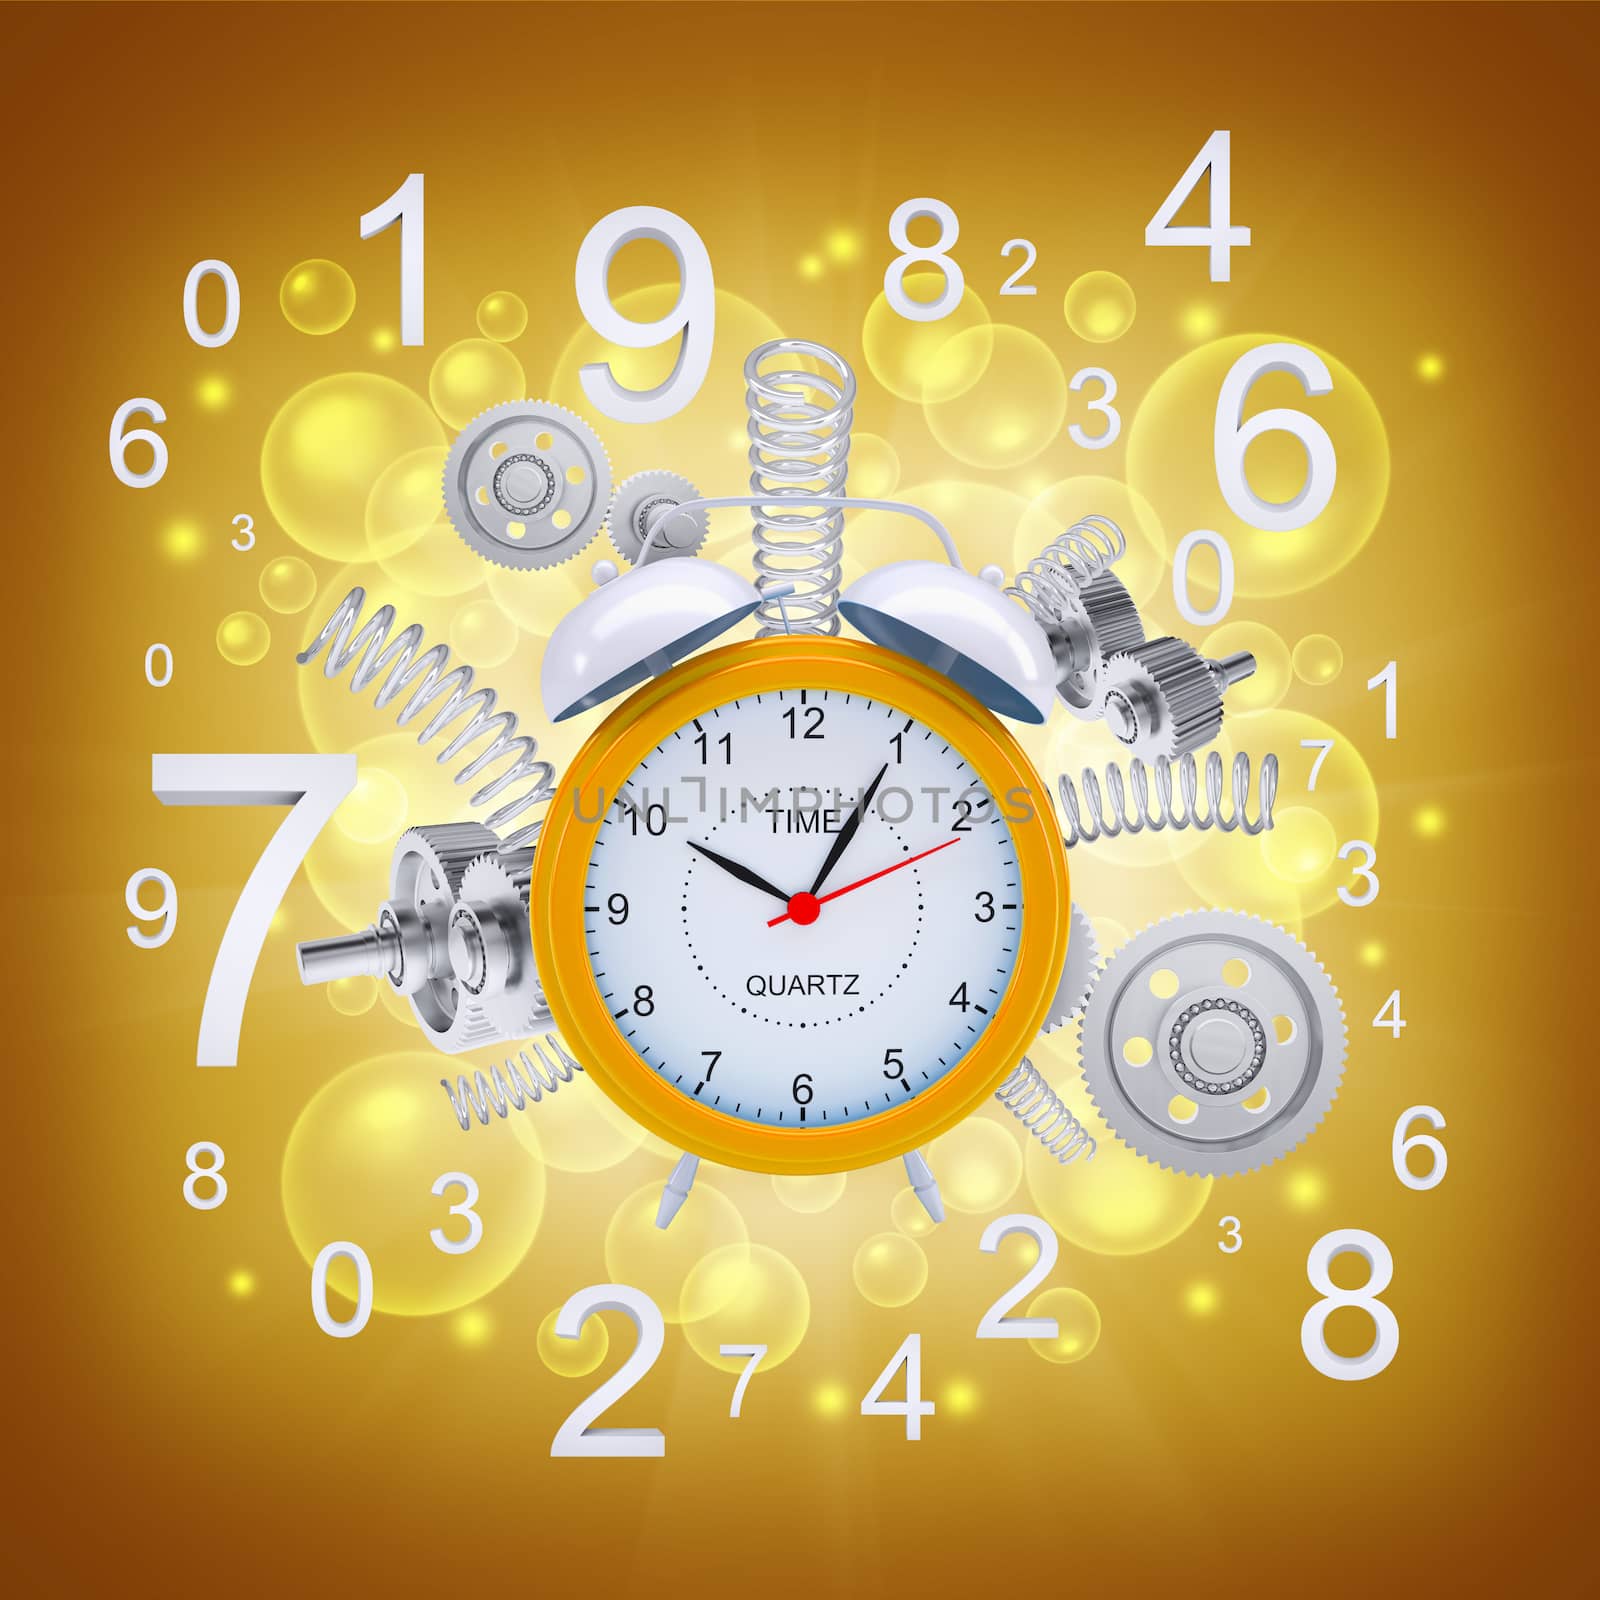 Alarm clock with springs and gears. Orange background